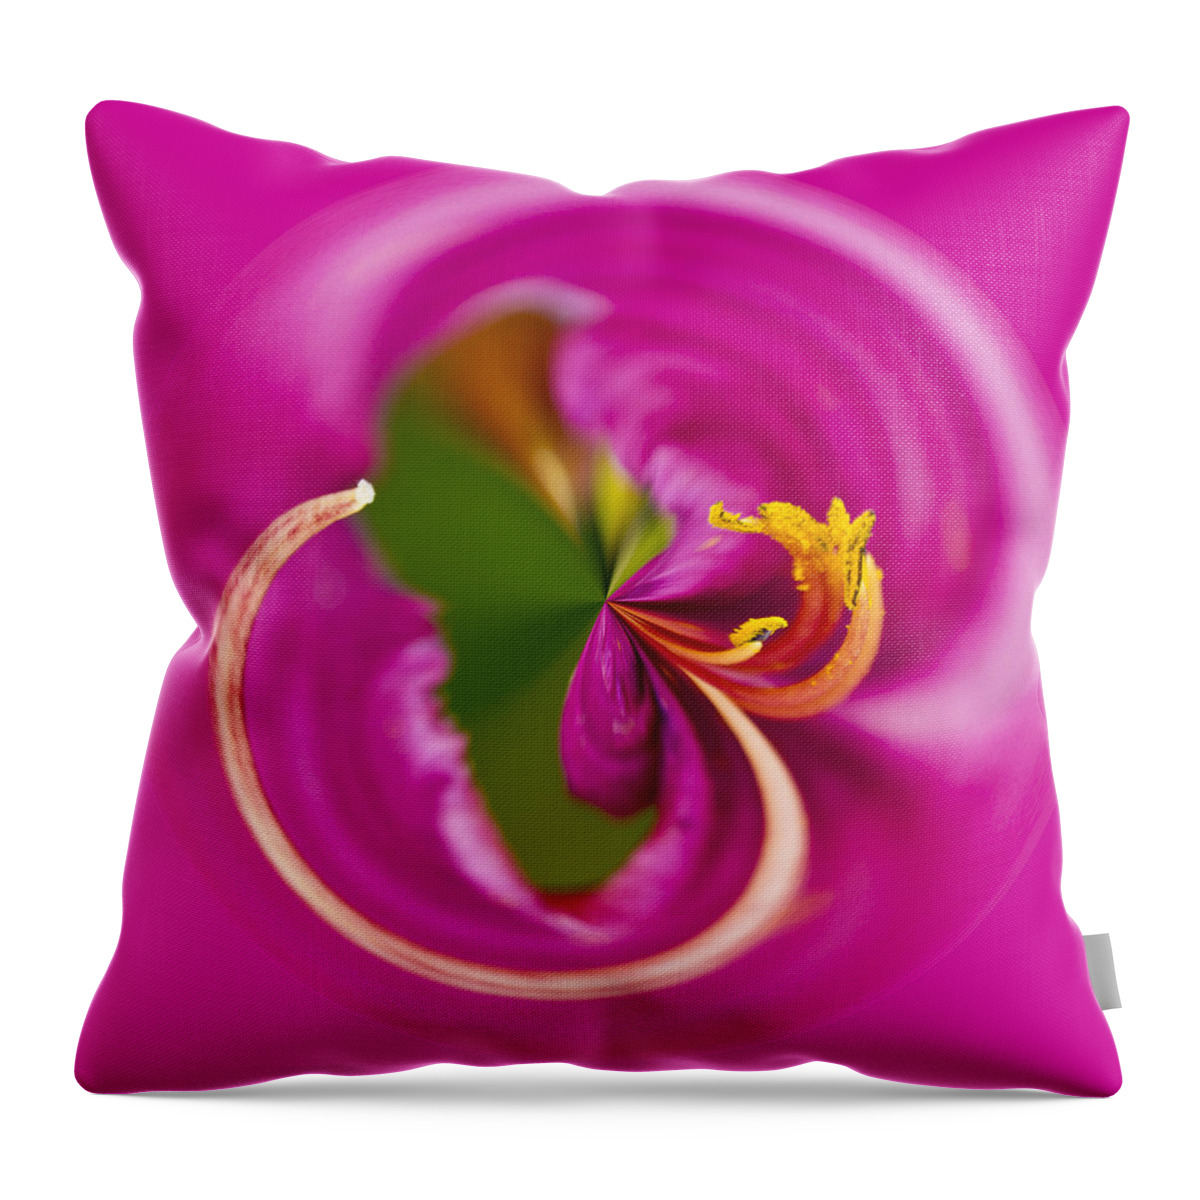 Asiatic Throw Pillow featuring the photograph Asiatic Lily Orb by Bill Barber